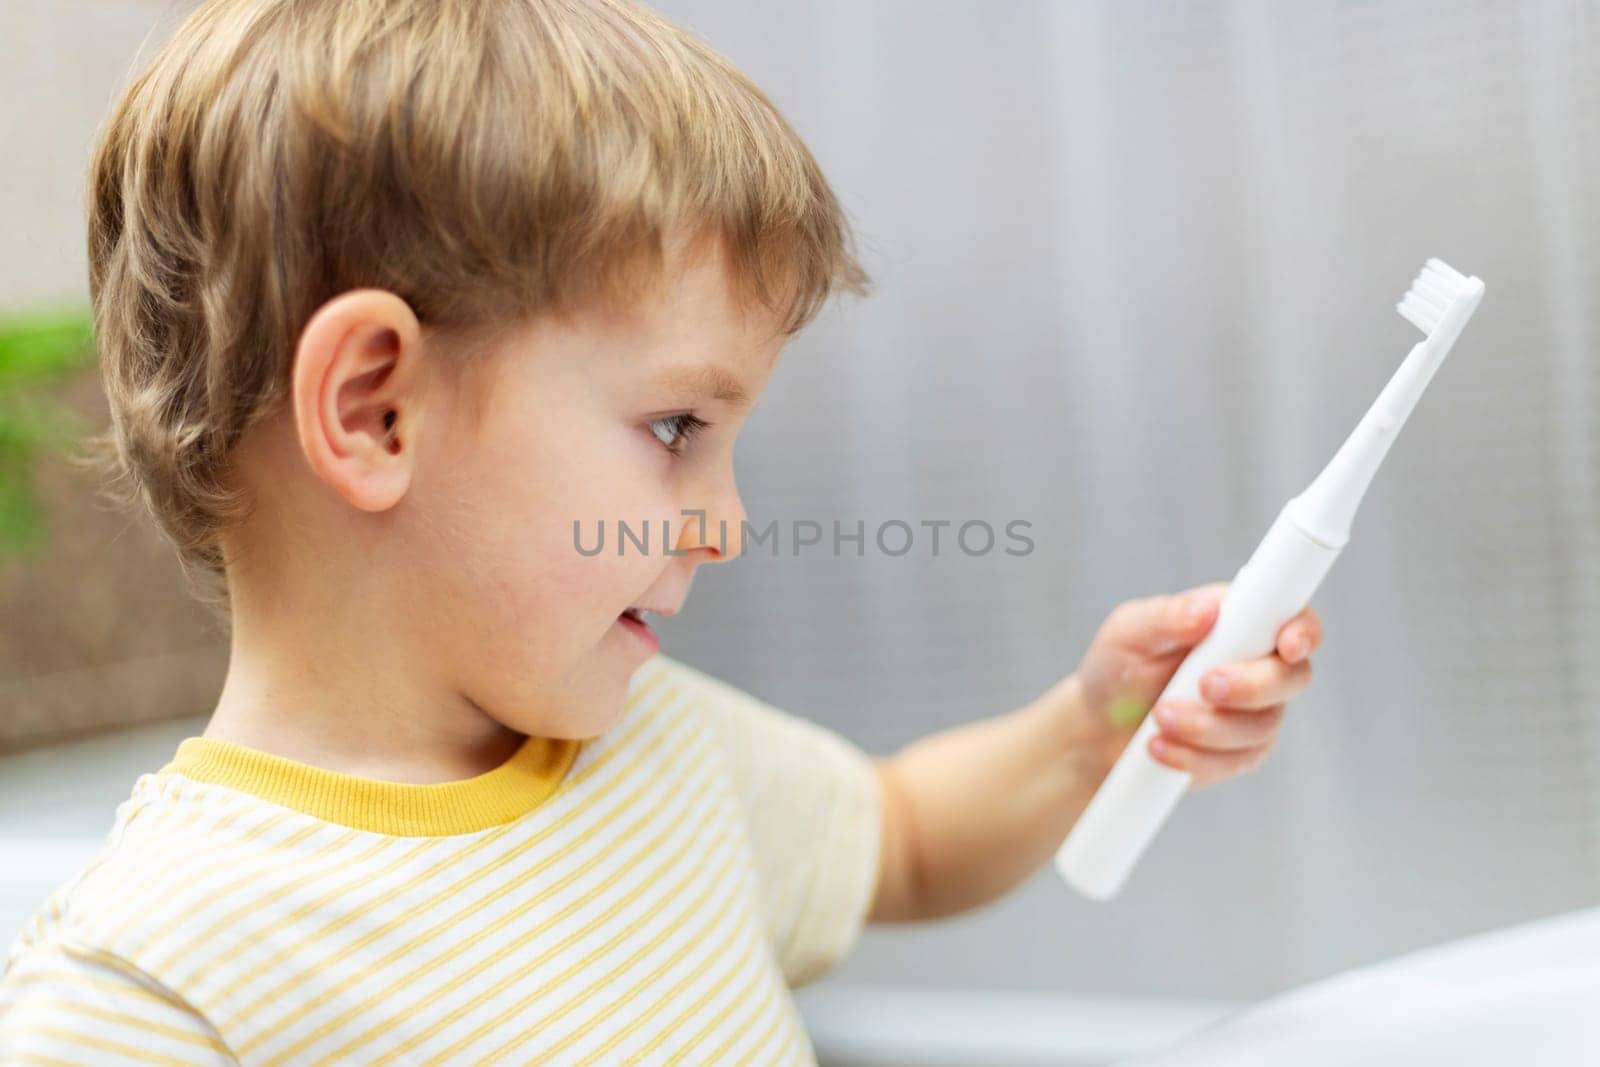 Smiling boy holding electric toothbrush, looking at it curiously in bathroom. Oral hygiene and health care concept for children. Design for educational poster, banner, and healthcare promotion.